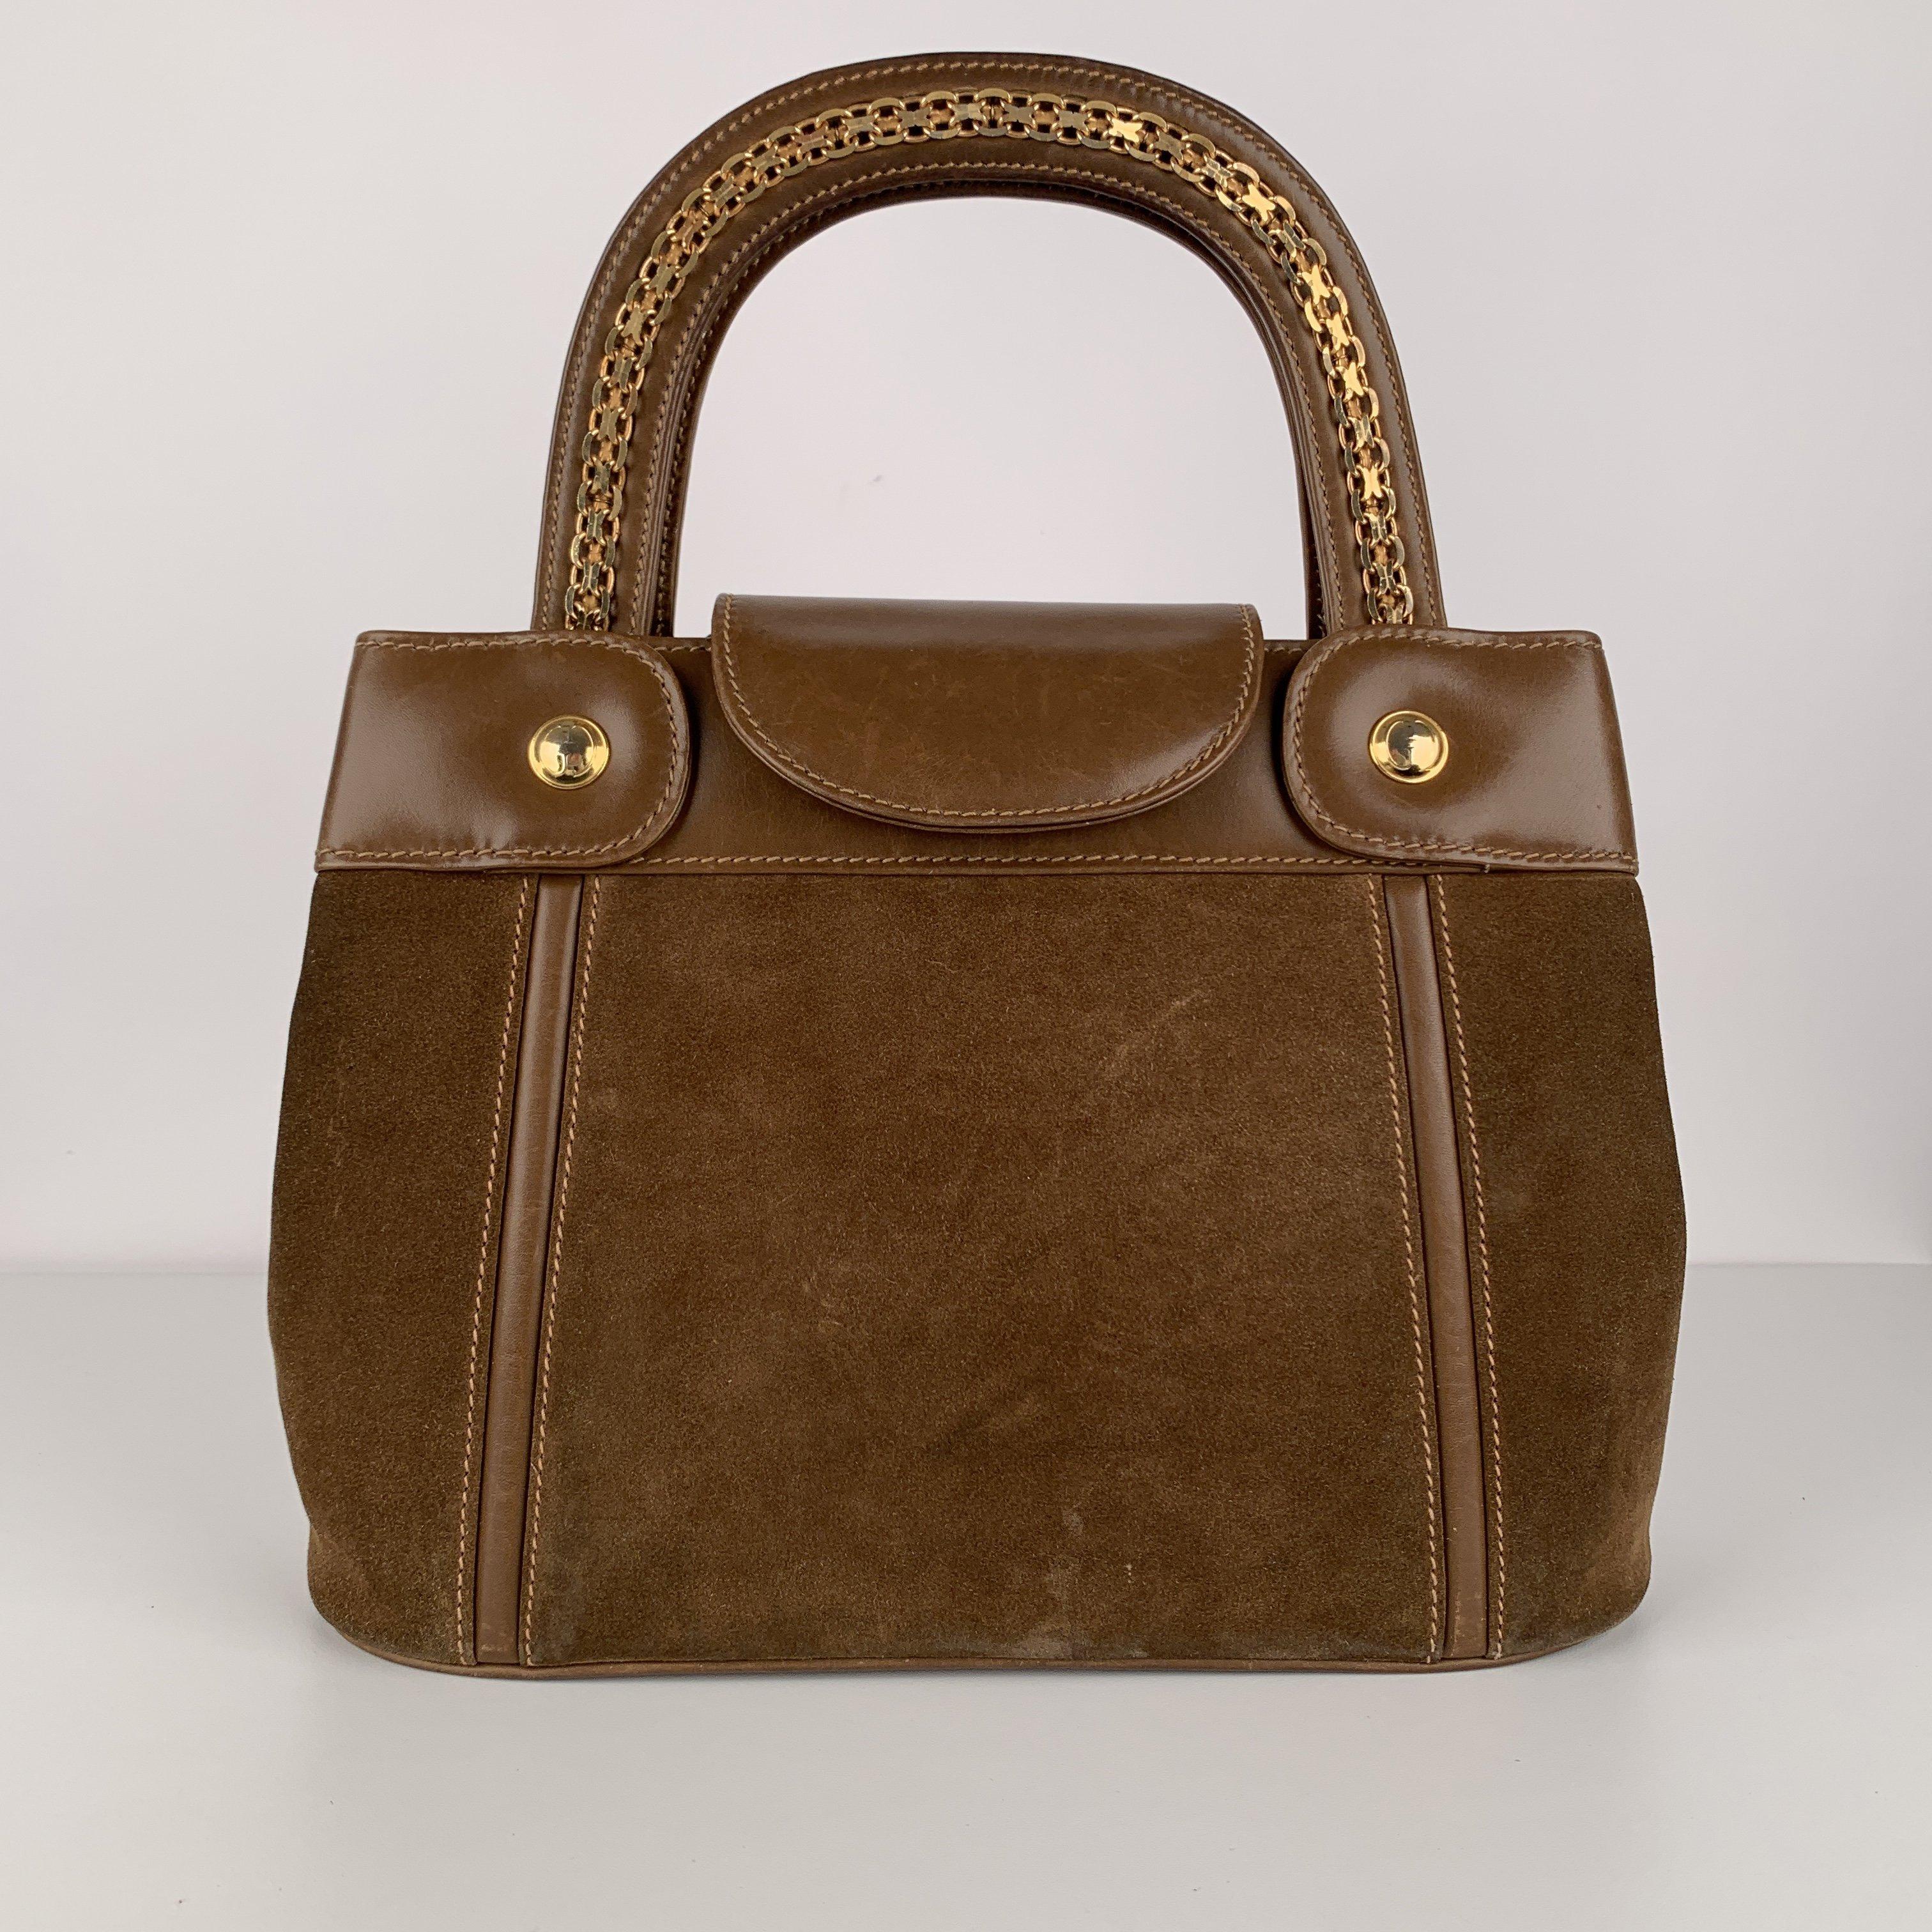 Women's Gucci Vintage Tan Suede Leather Tote Handbag with Chain Detail